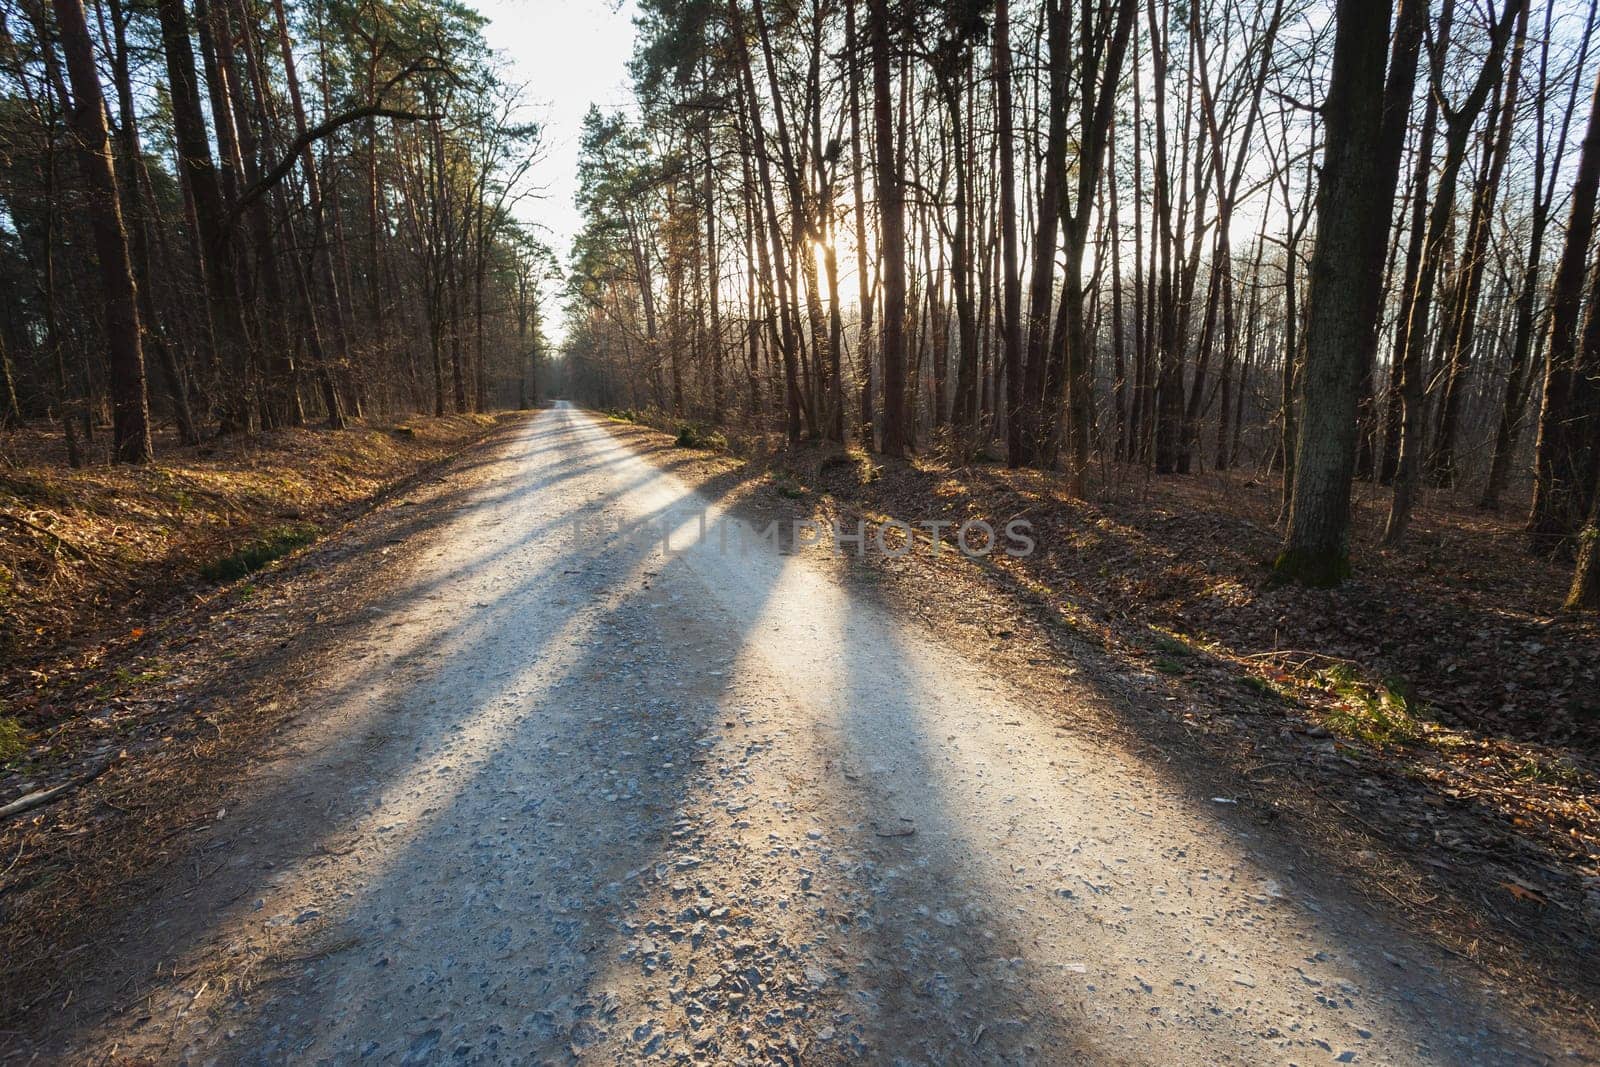 Shadows on the road through the forest, Nowiny, Poland